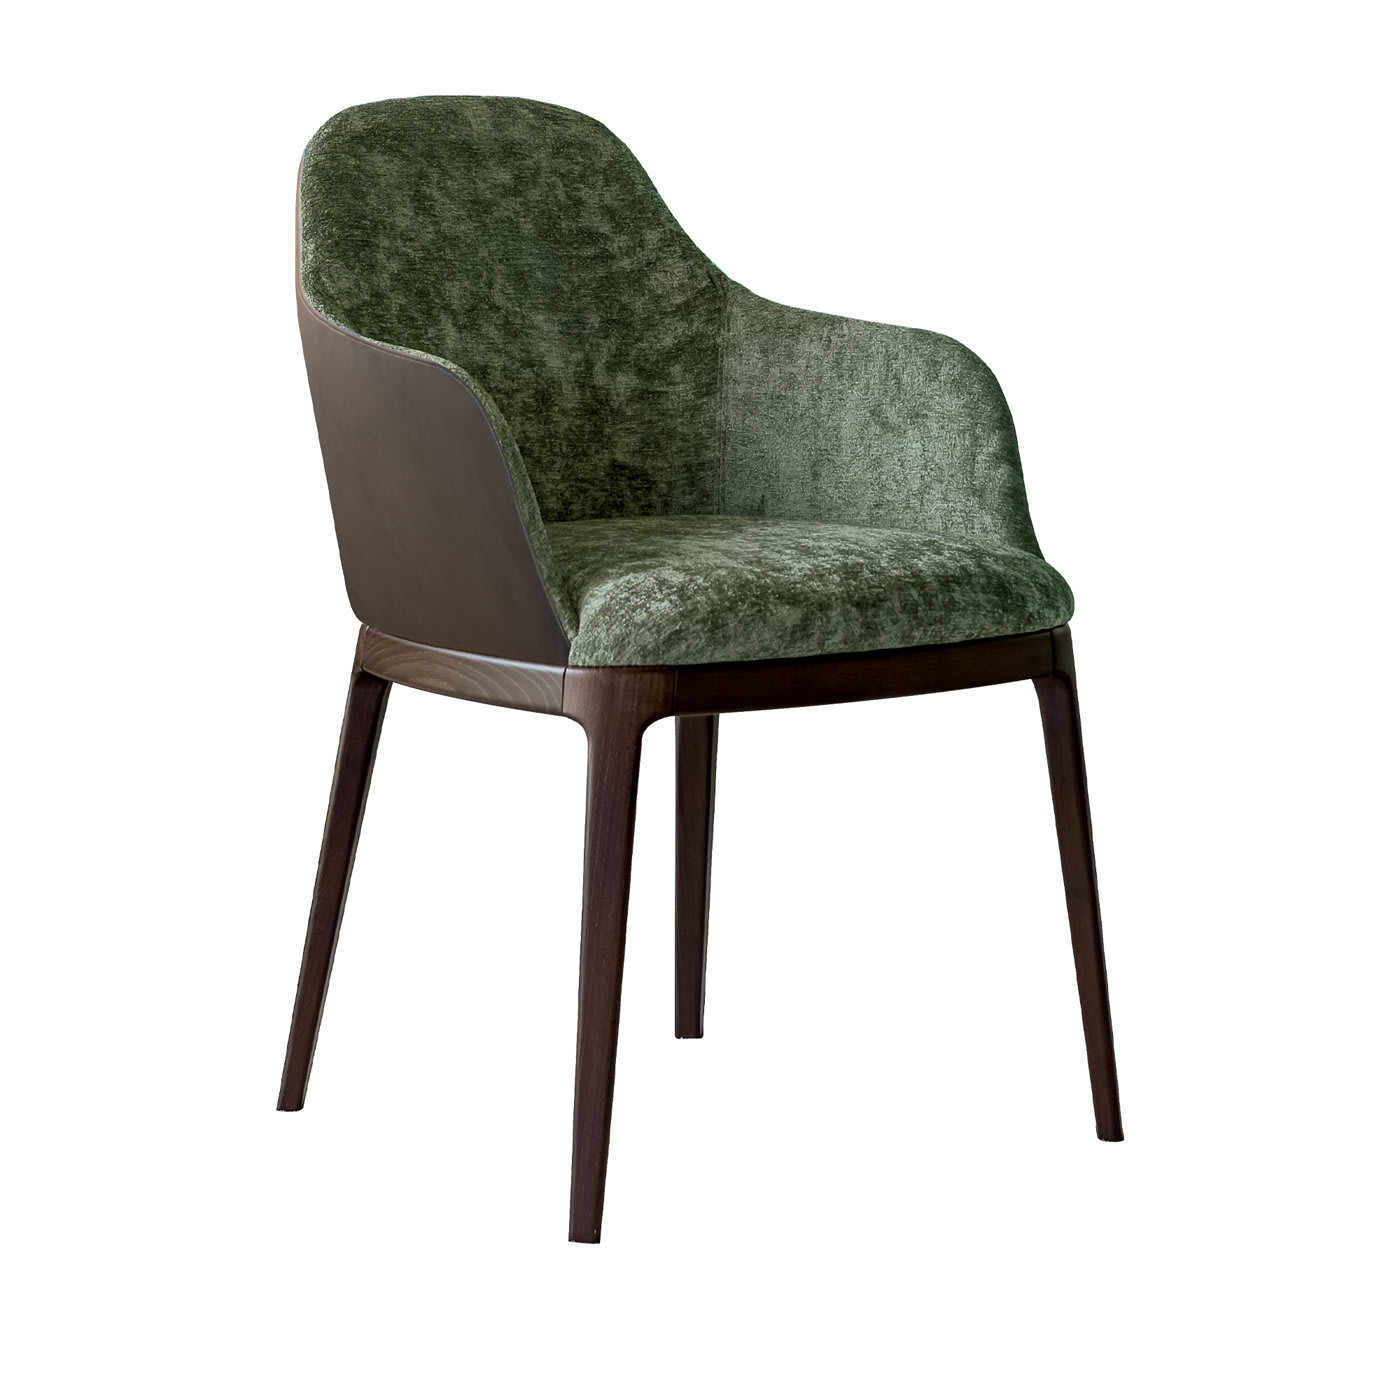 Gulp Green chair with Faux-leather  - Dall'Agnese